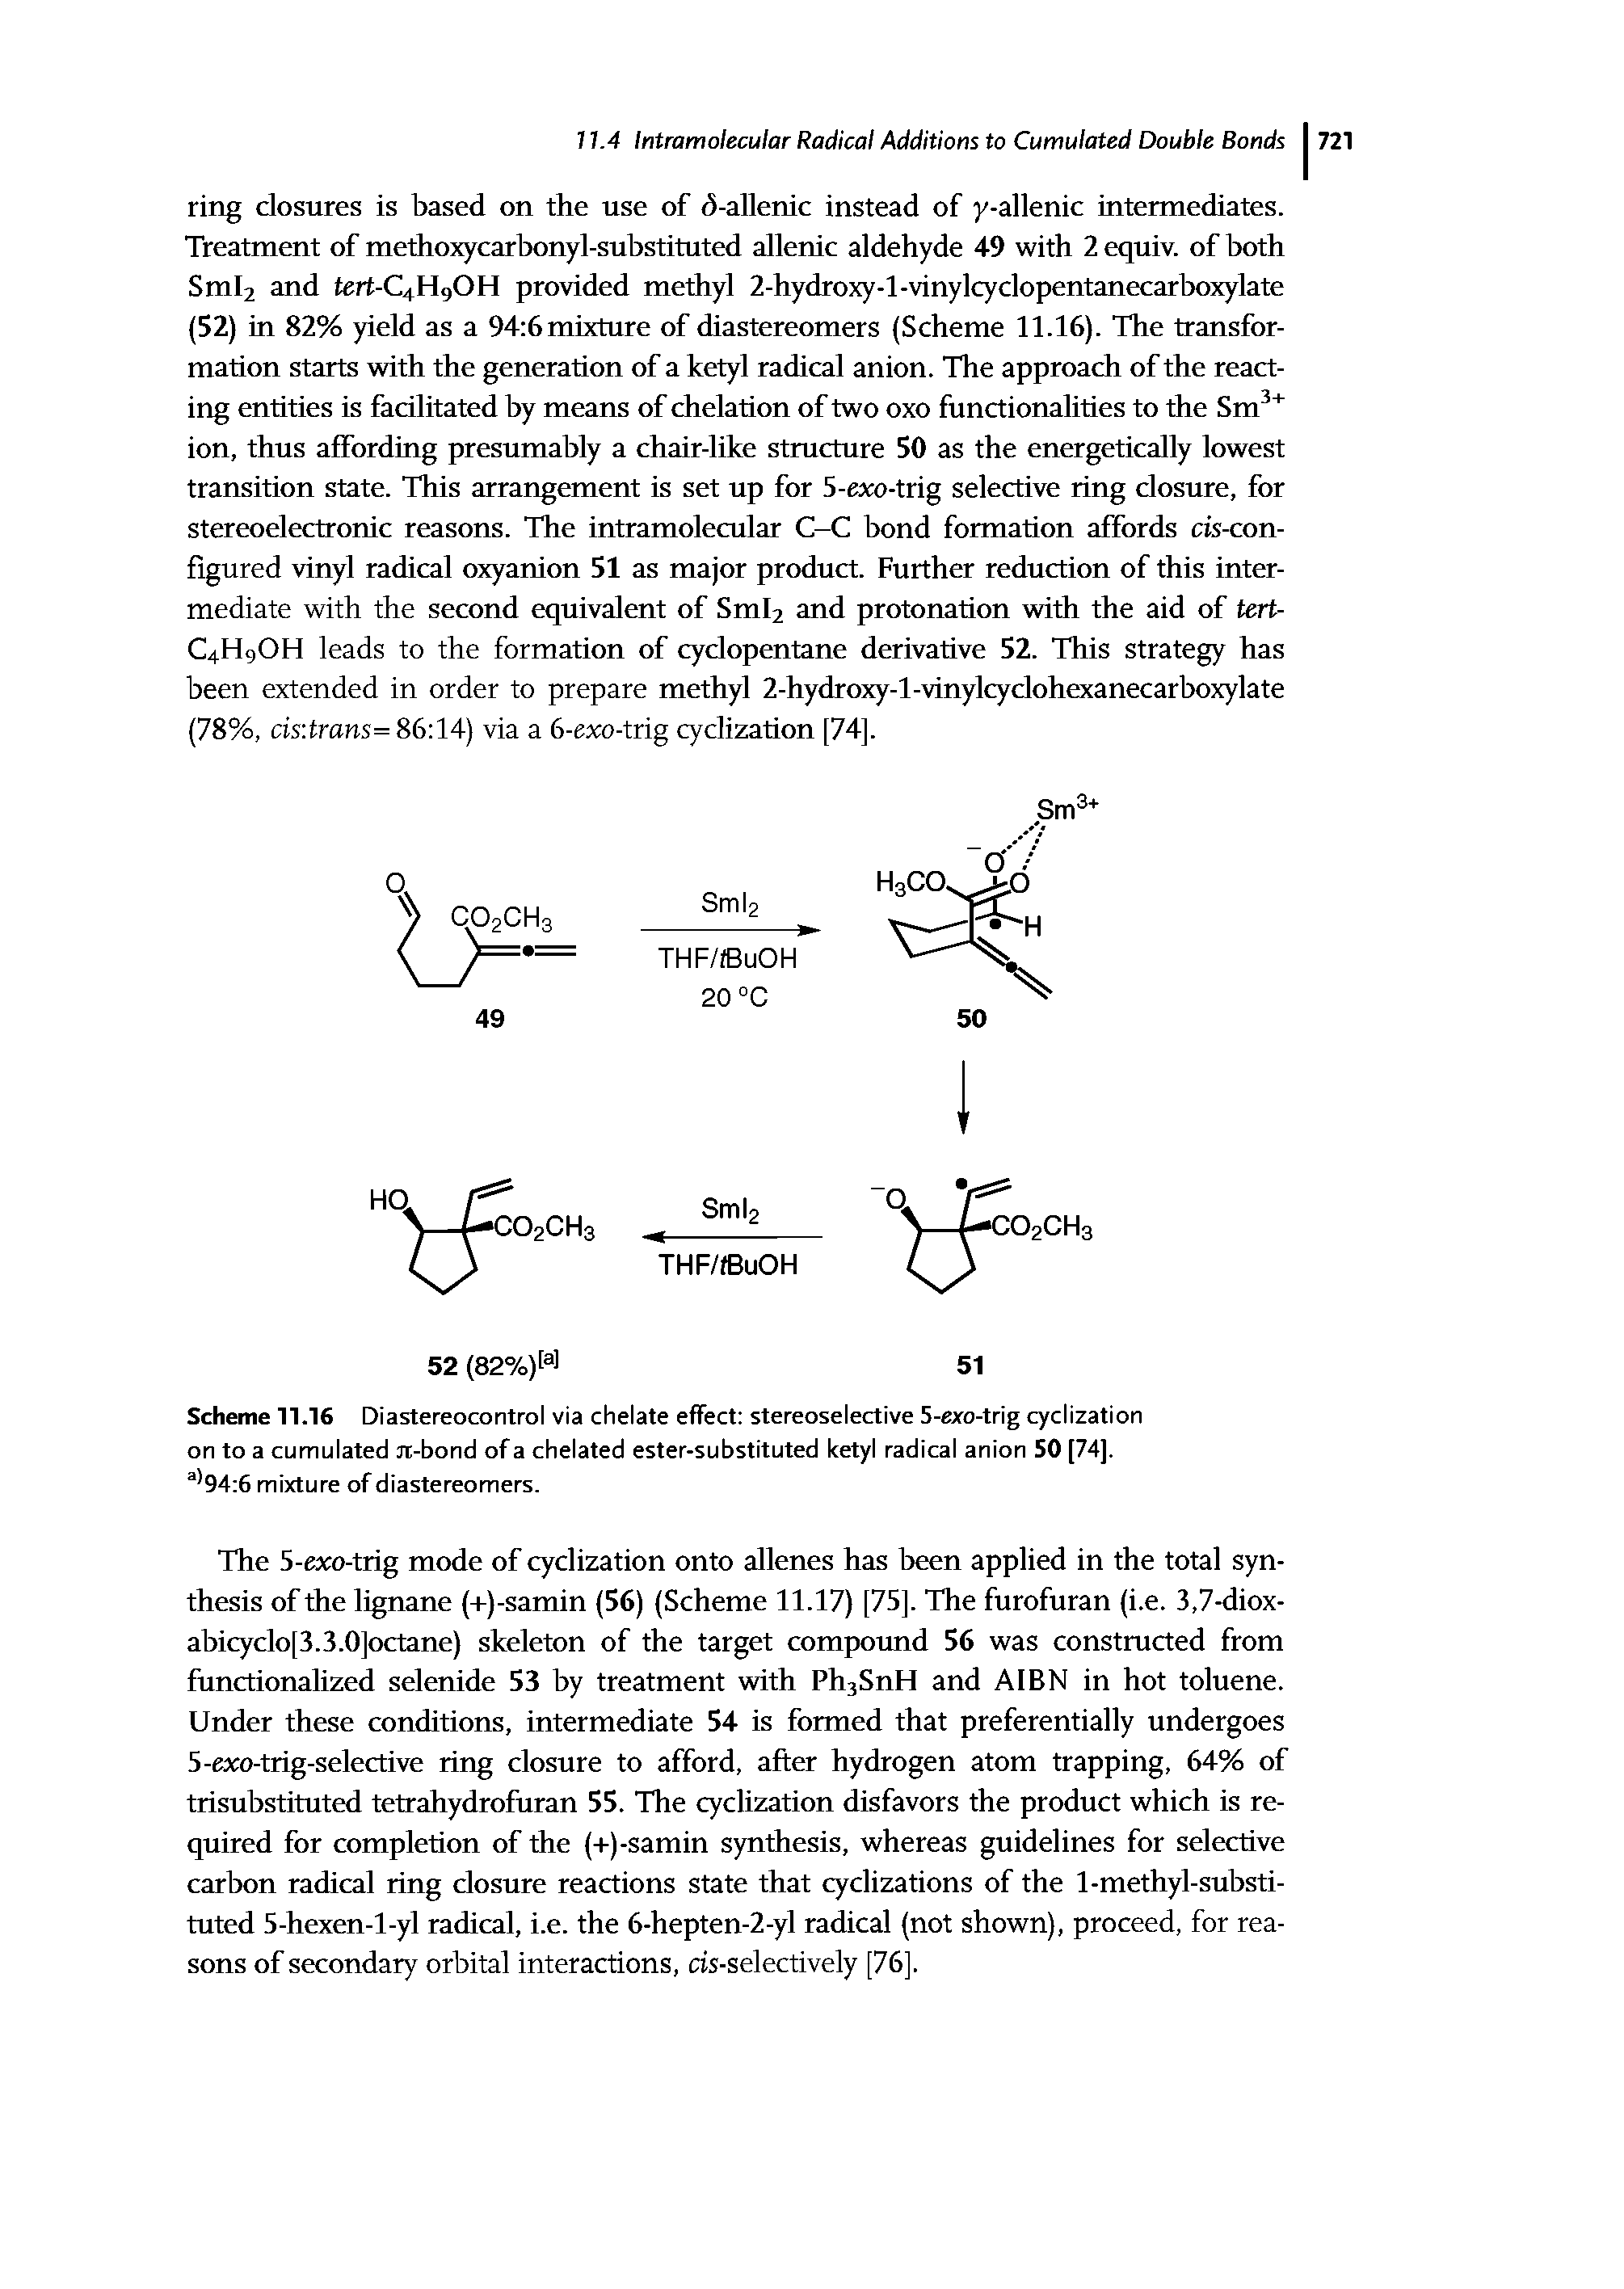 Scheme 11.16 Diastereocontrol via chelate effect stereoselective 5-exo-trig cyclization on to a cumulated Jt-bond of a chelated ester-substituted ketyl radical anion 50 [74]. a 94 6 mixture of diastereomers.